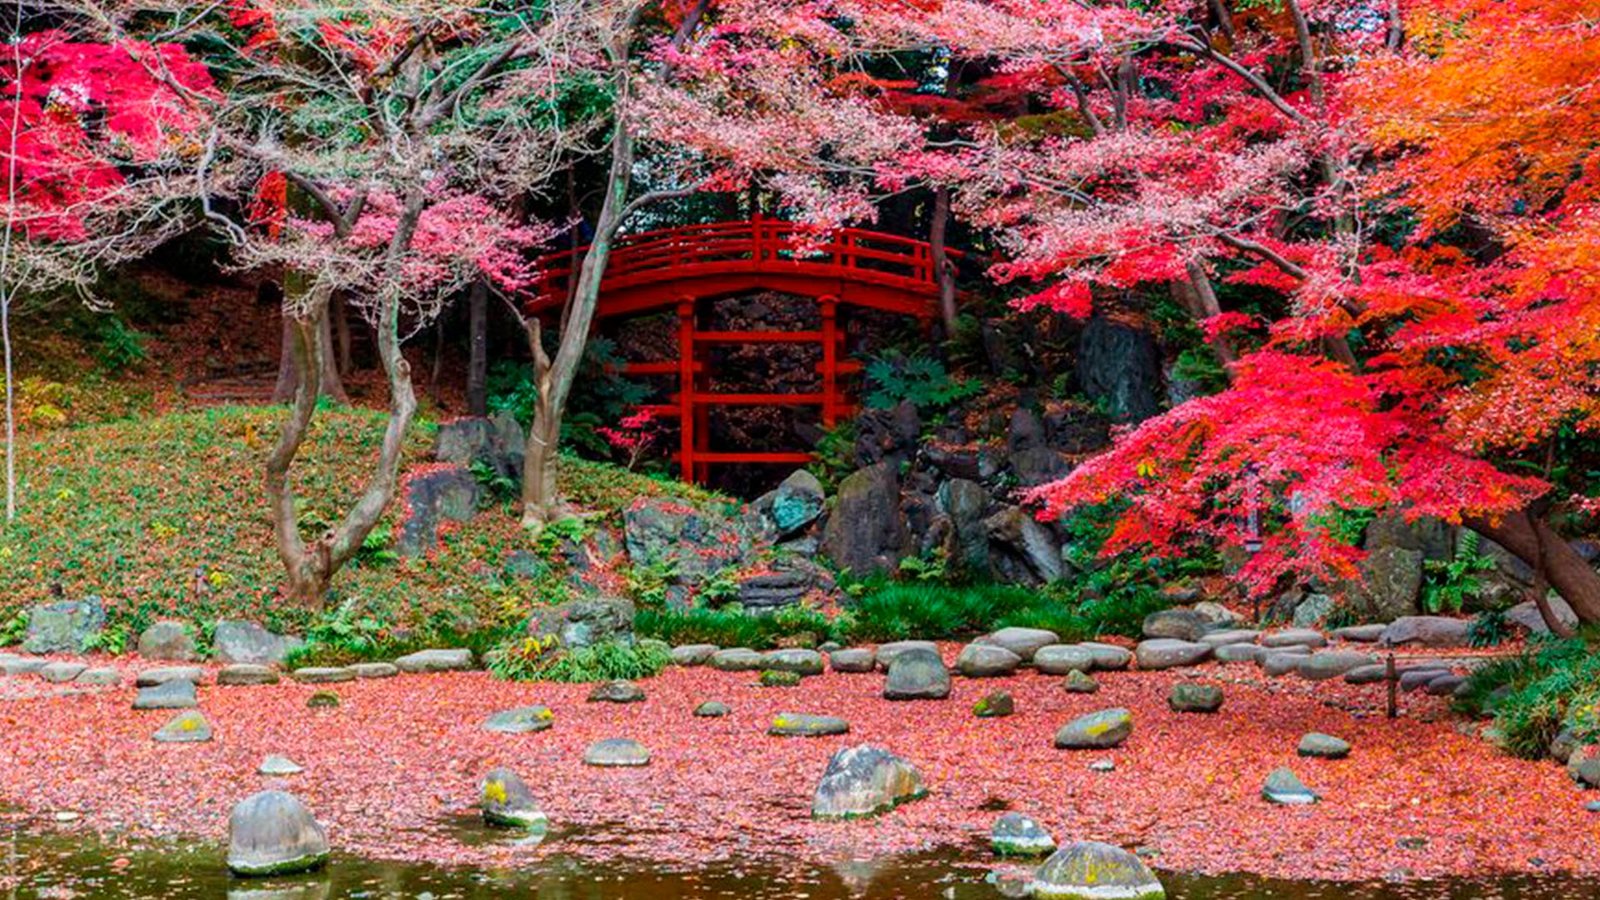 Top 10 Most Beautiful Gardens in the World to see Today